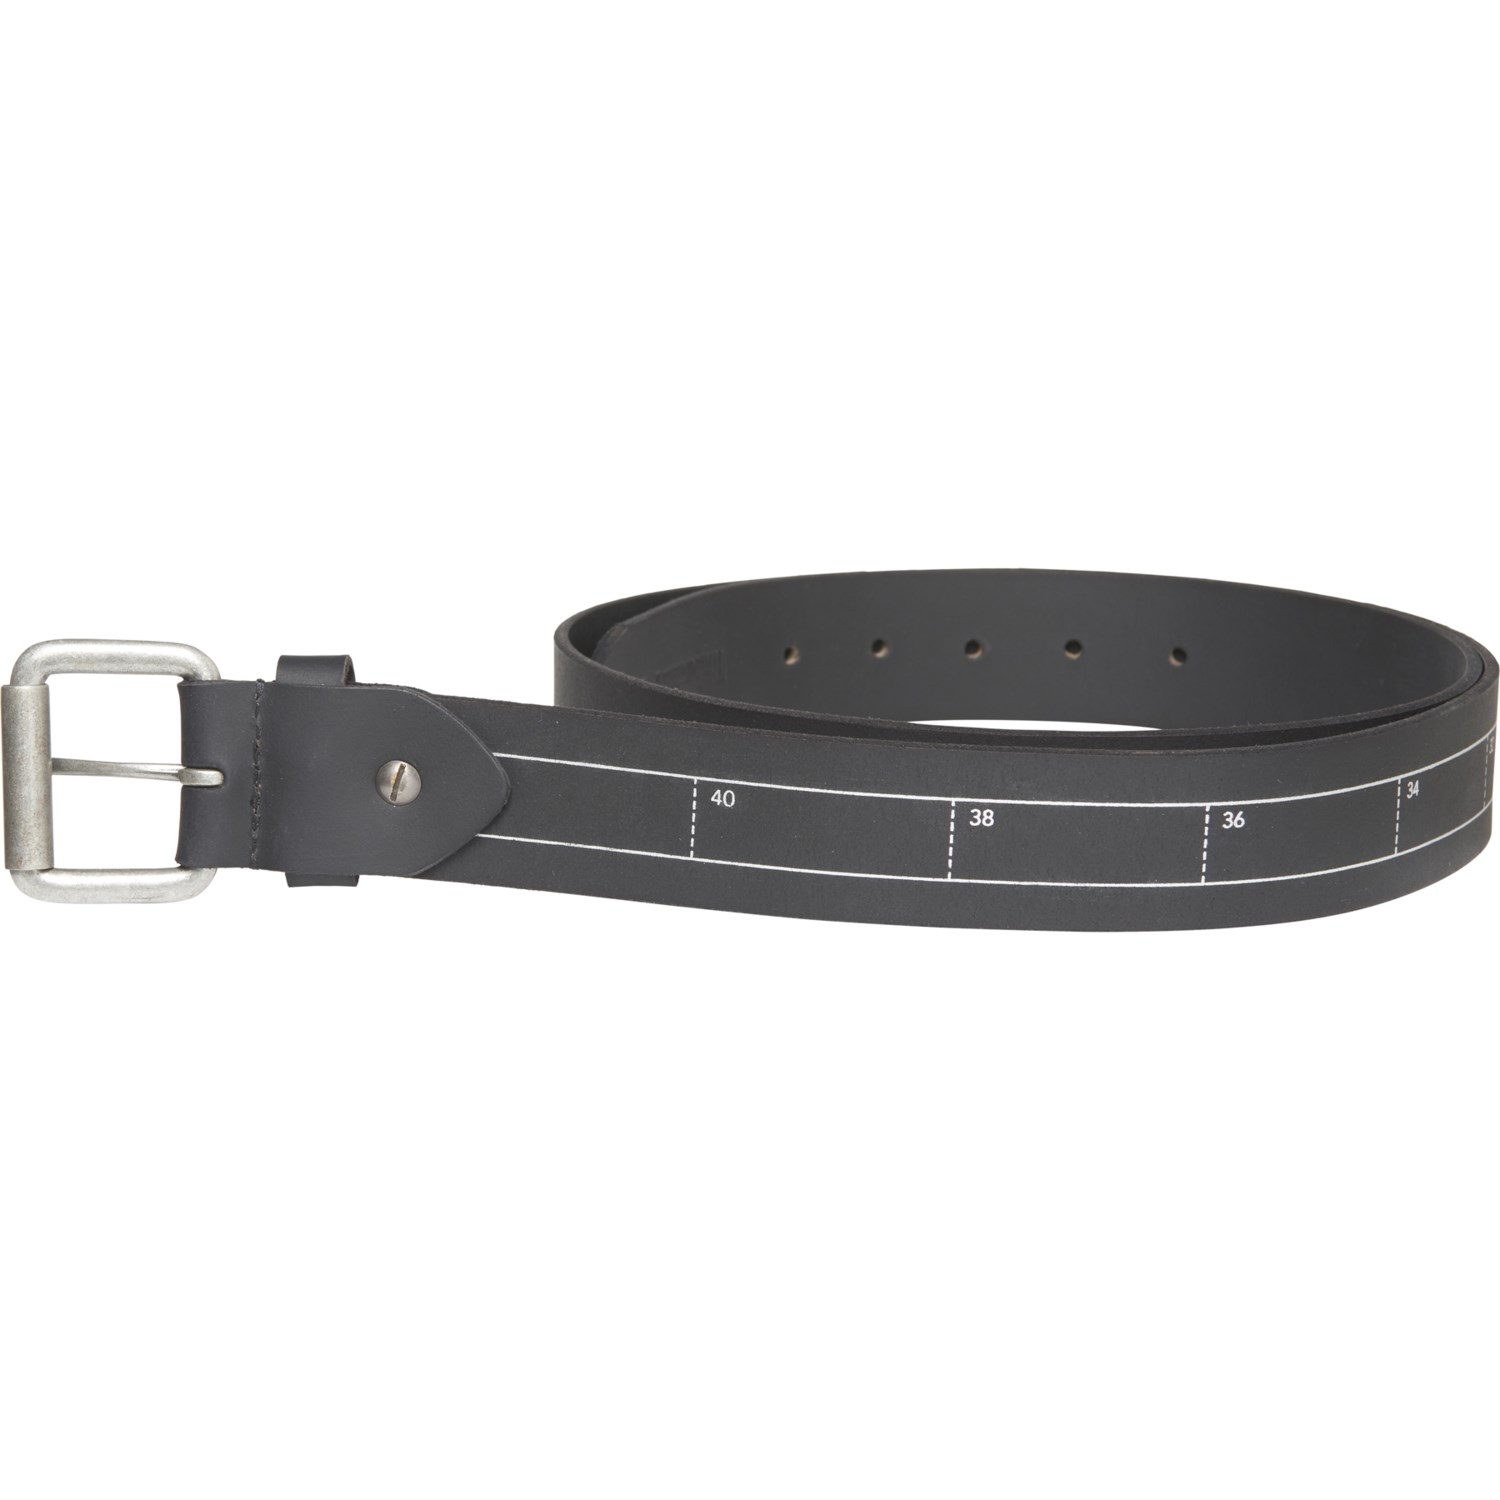 Timberland Pro Cut to Fit Belt (For Men) - Save 57%